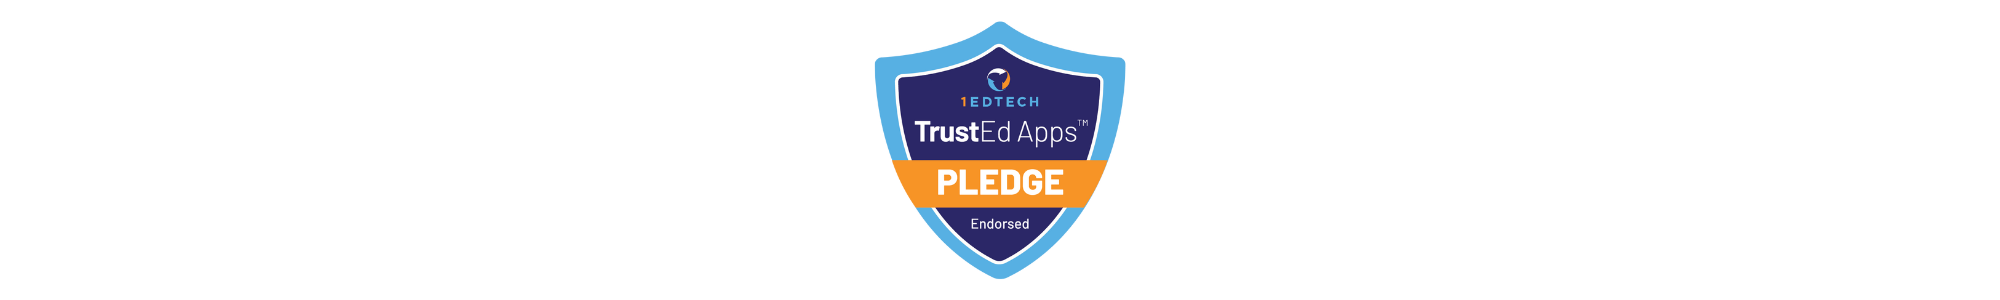 Screenshot of Holopin's trusted apps pledge badge